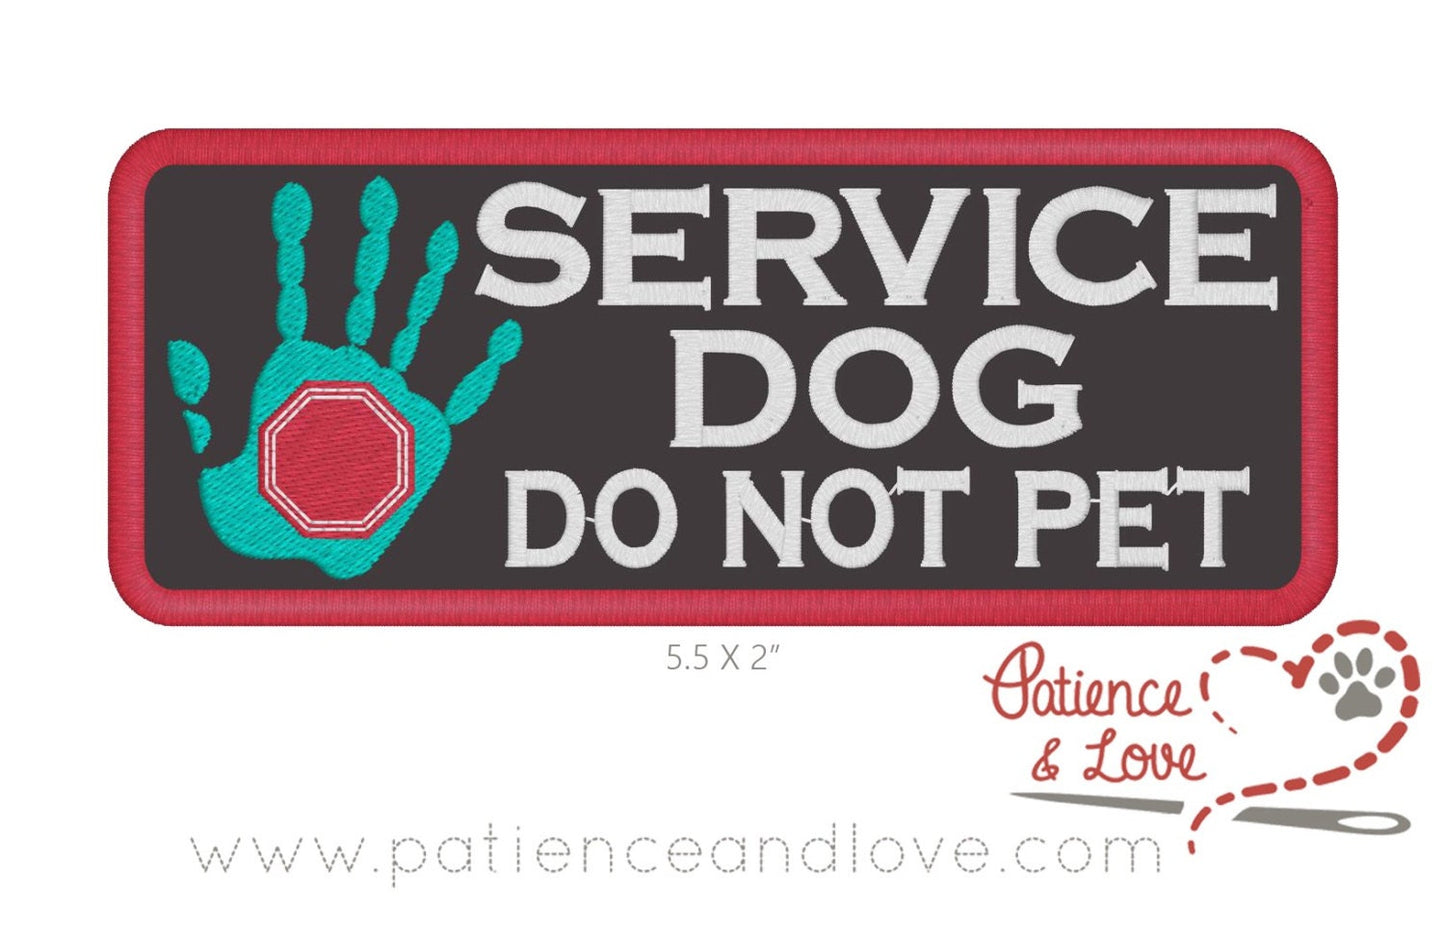 Service Dog Do Not Pet, hand with stop sign, 5.5 x 2 inch rectangular patch